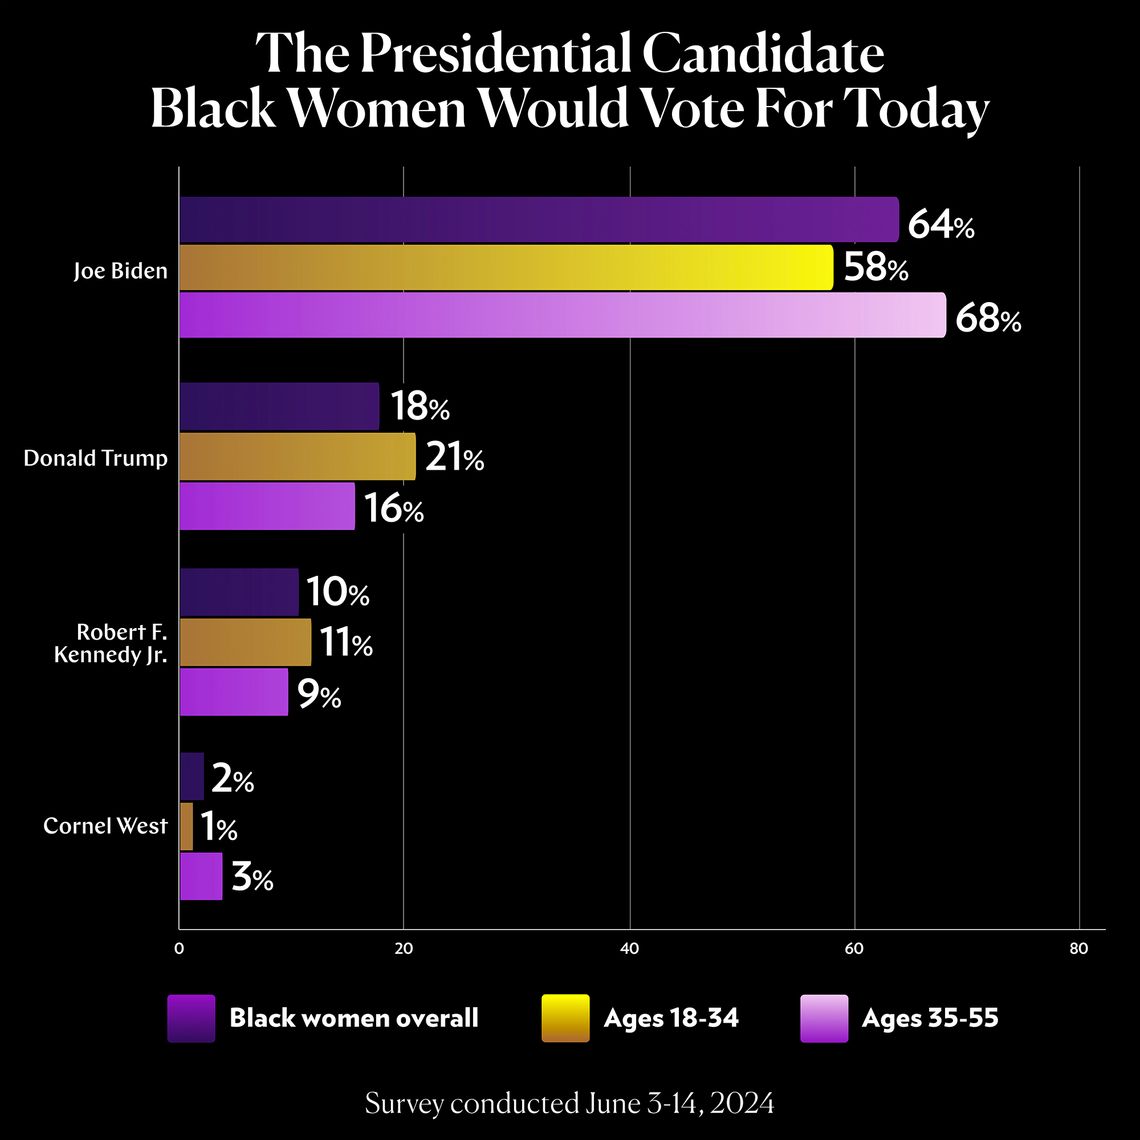 A bar chart showing which presidential candidate black women would vote for if the 2024 election were held today.